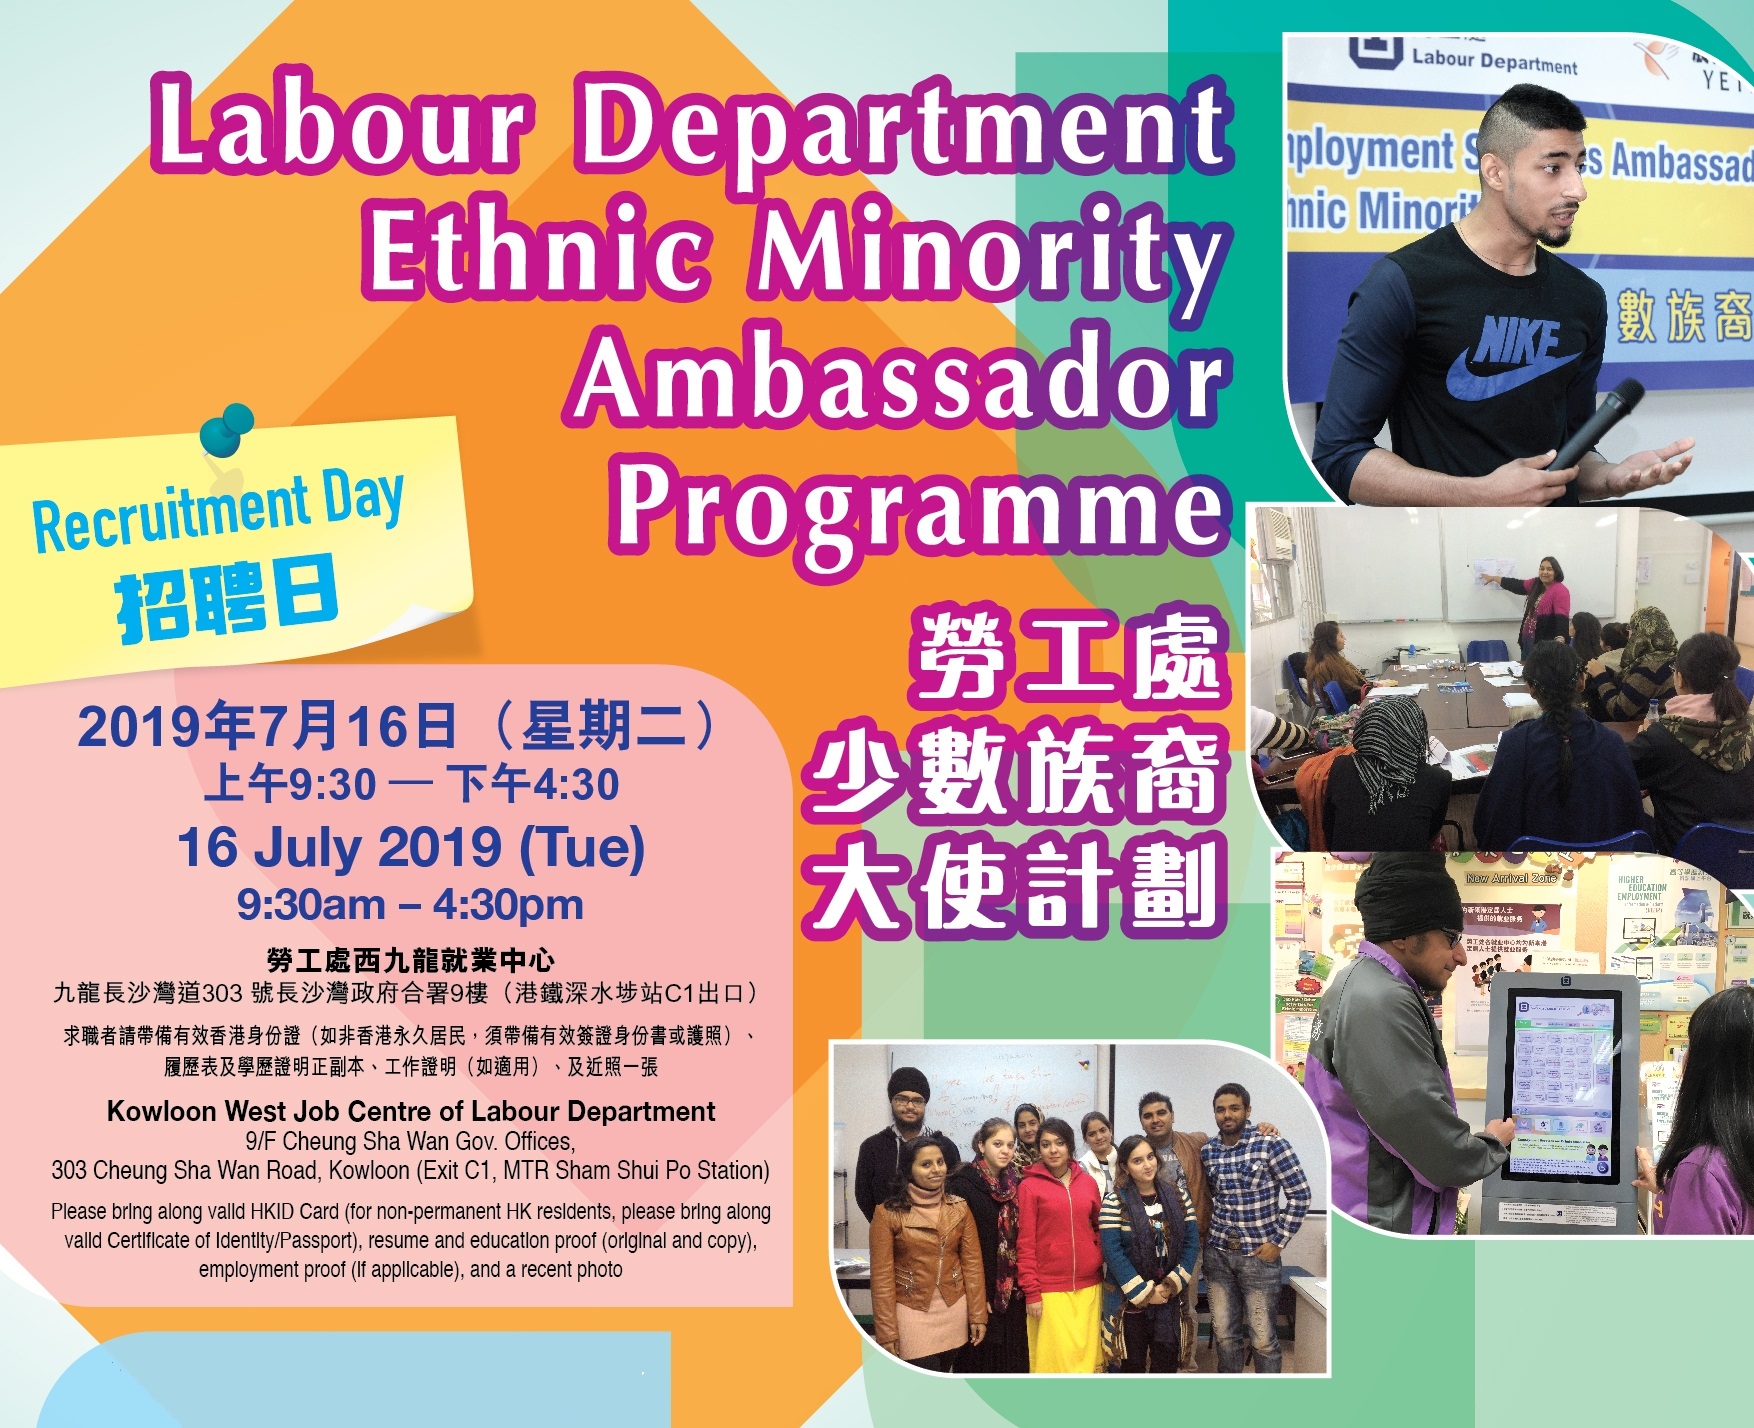 Poster of the programme, showing photos of ethnic minority ambassadors serving the public and participating in training